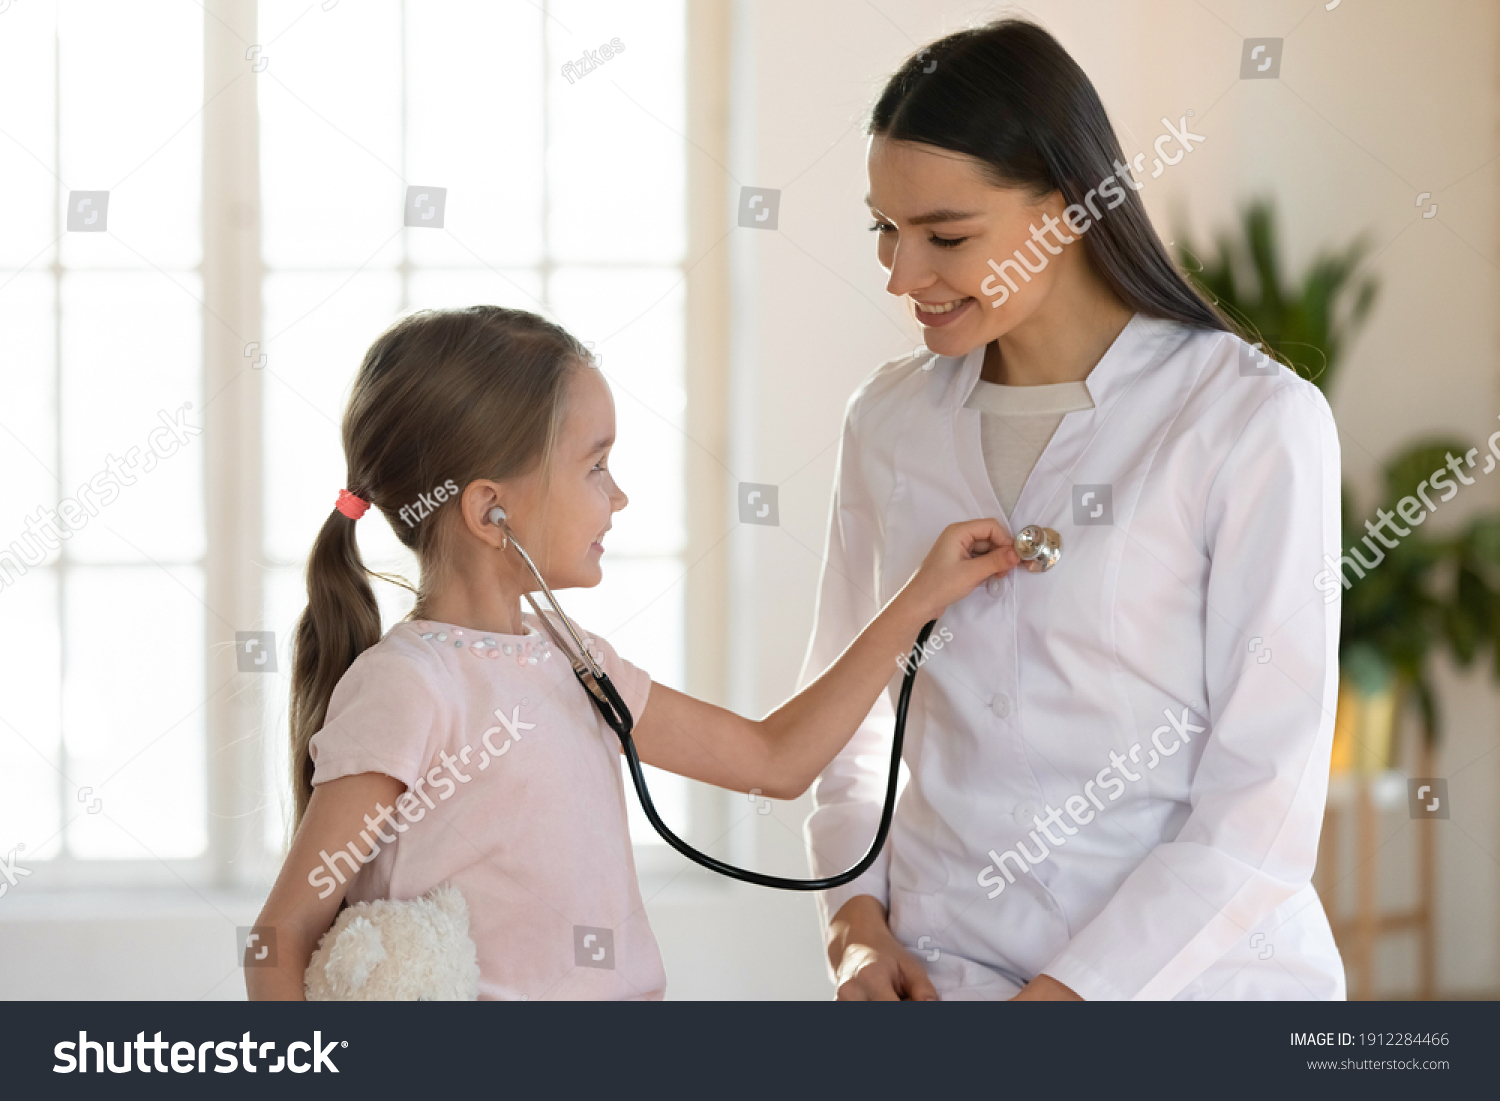 Cute small girl child hold stethoscope listen to female nurse heart at consultation in hospital. Caring woman doctor have fun play with little kid patient in clinic. Children healthcare concept. #1912284466